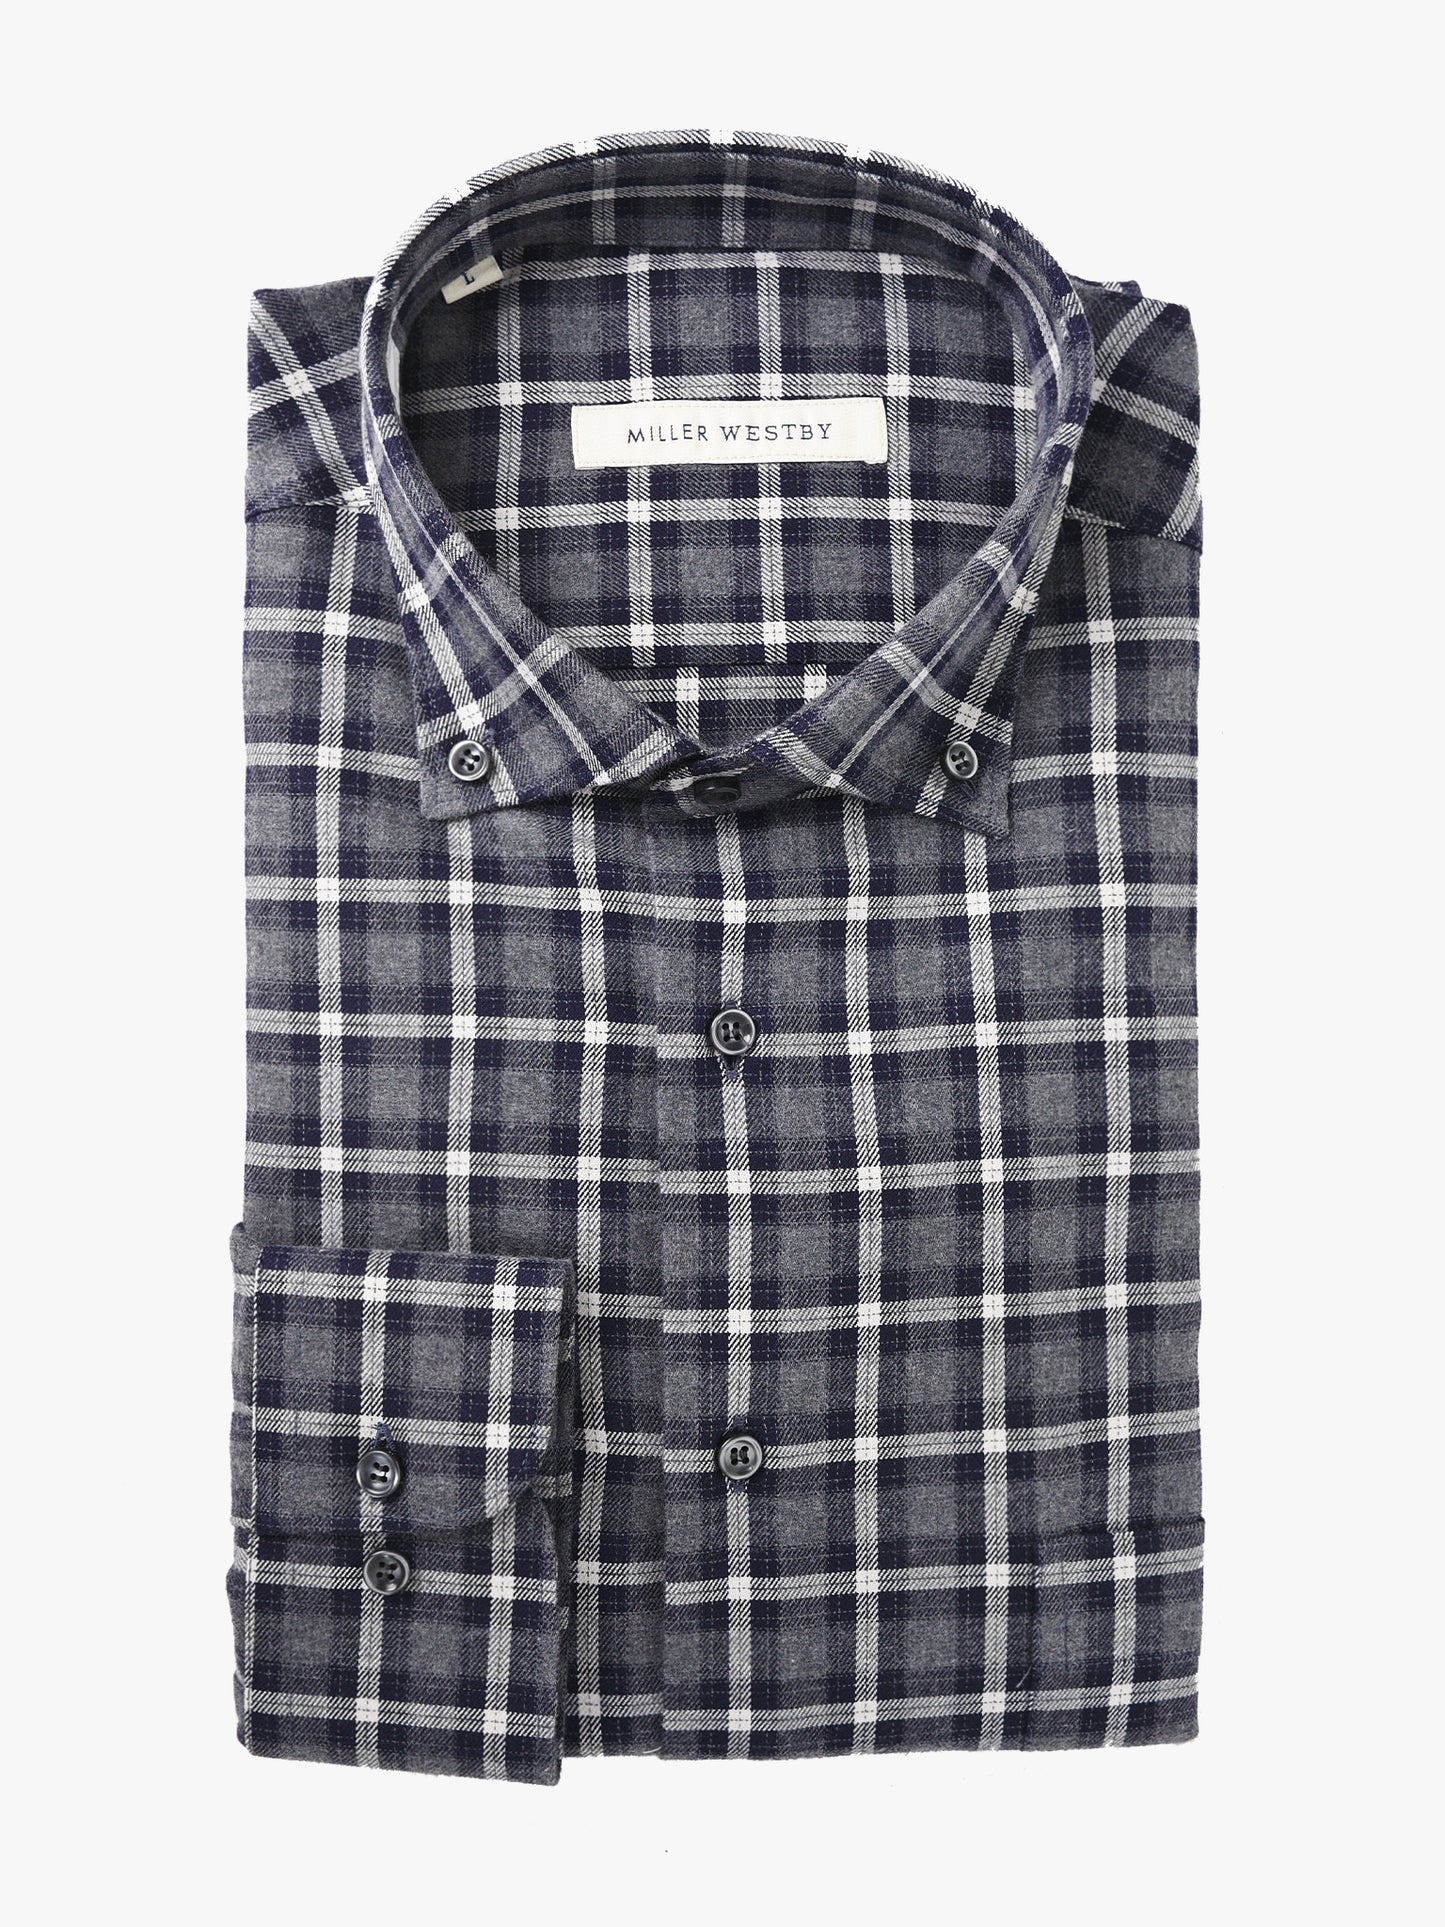 Miller Westby Men's Indy Button-Down Shirt